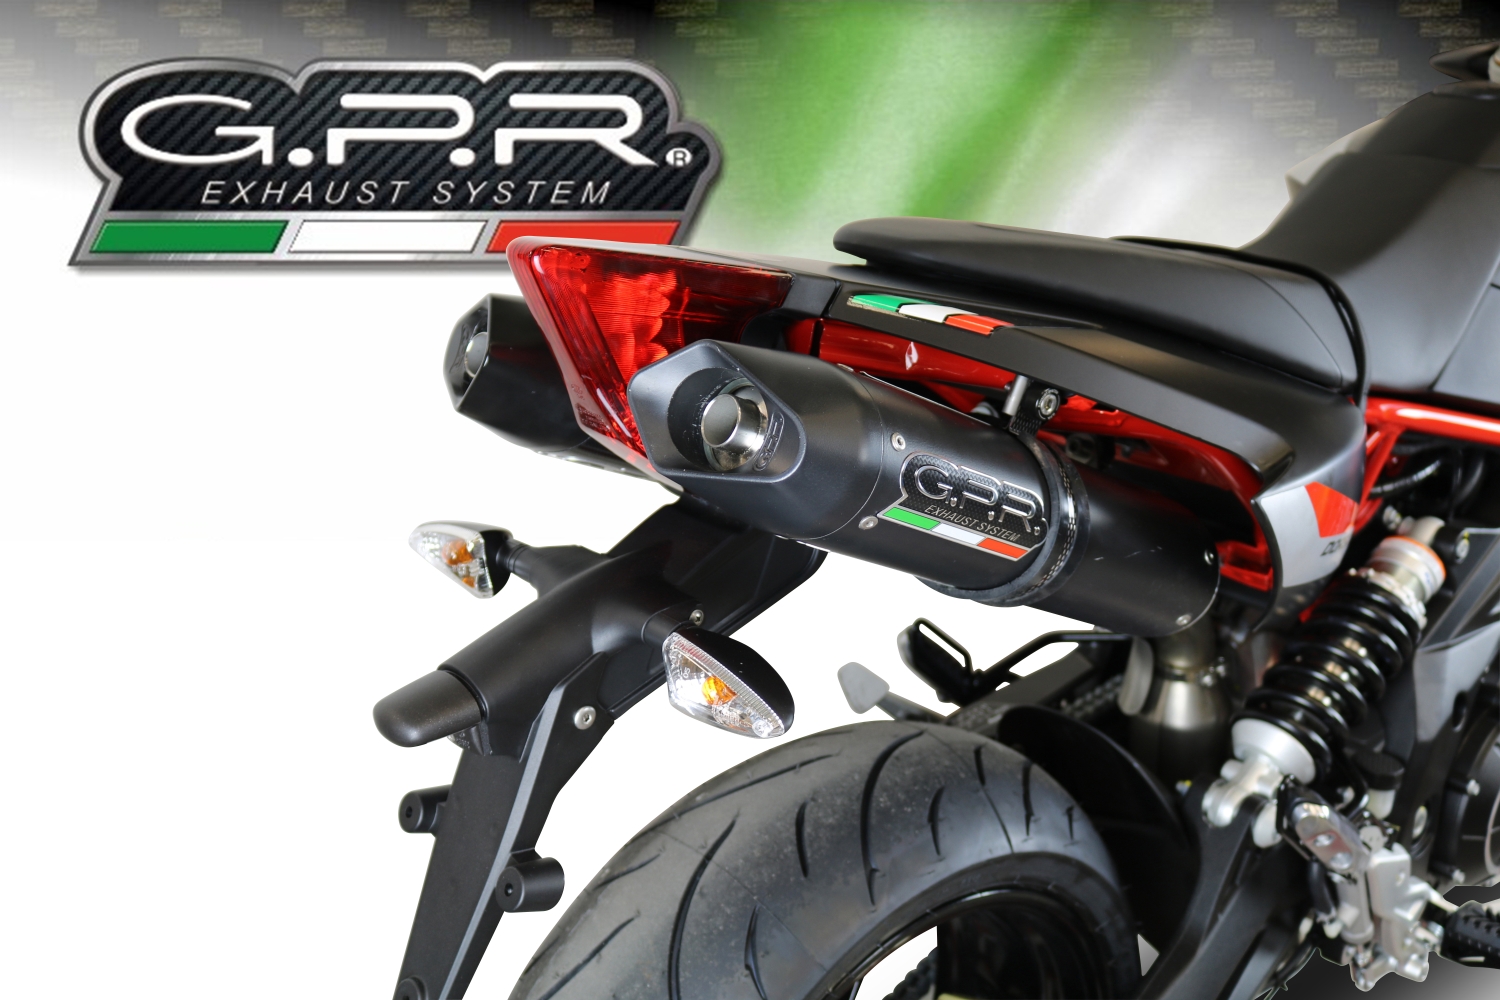 Exhaust system compatible with Aprilia Dorsoduro 750 2008-2016, Furore Nero, Dual racing slip-on exhaust including link pipes 